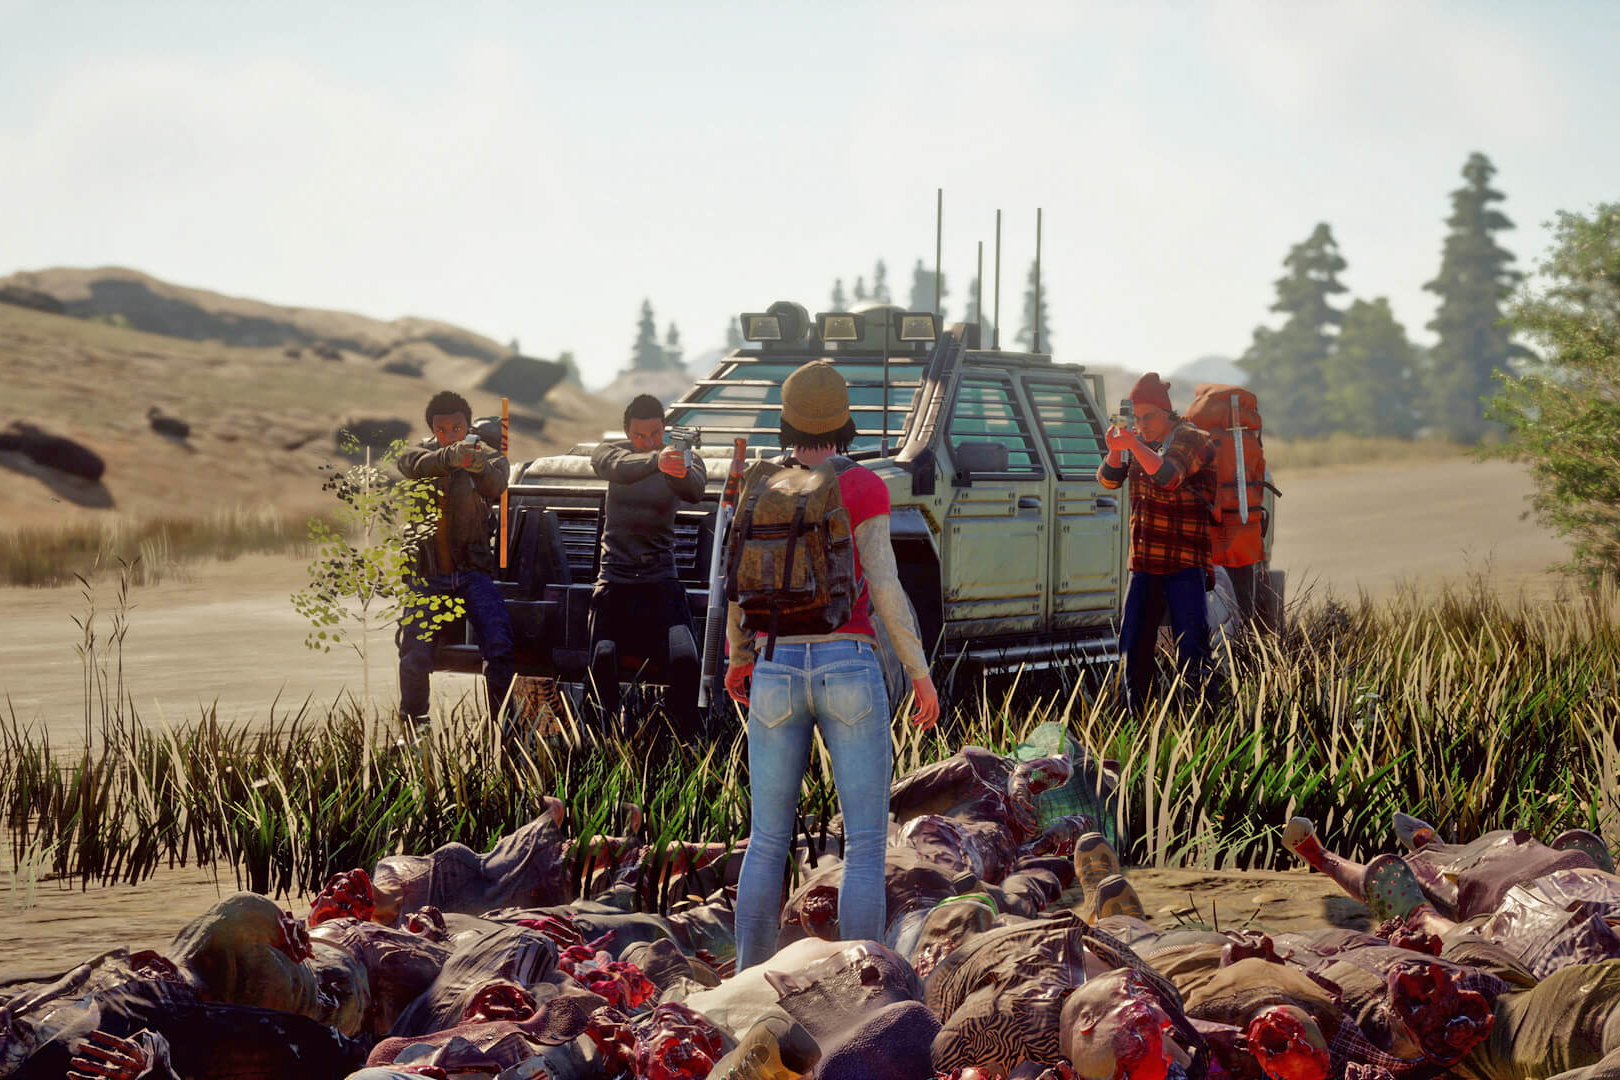 New trailers for State of Decay 3, Psychonauts 2, The Medium